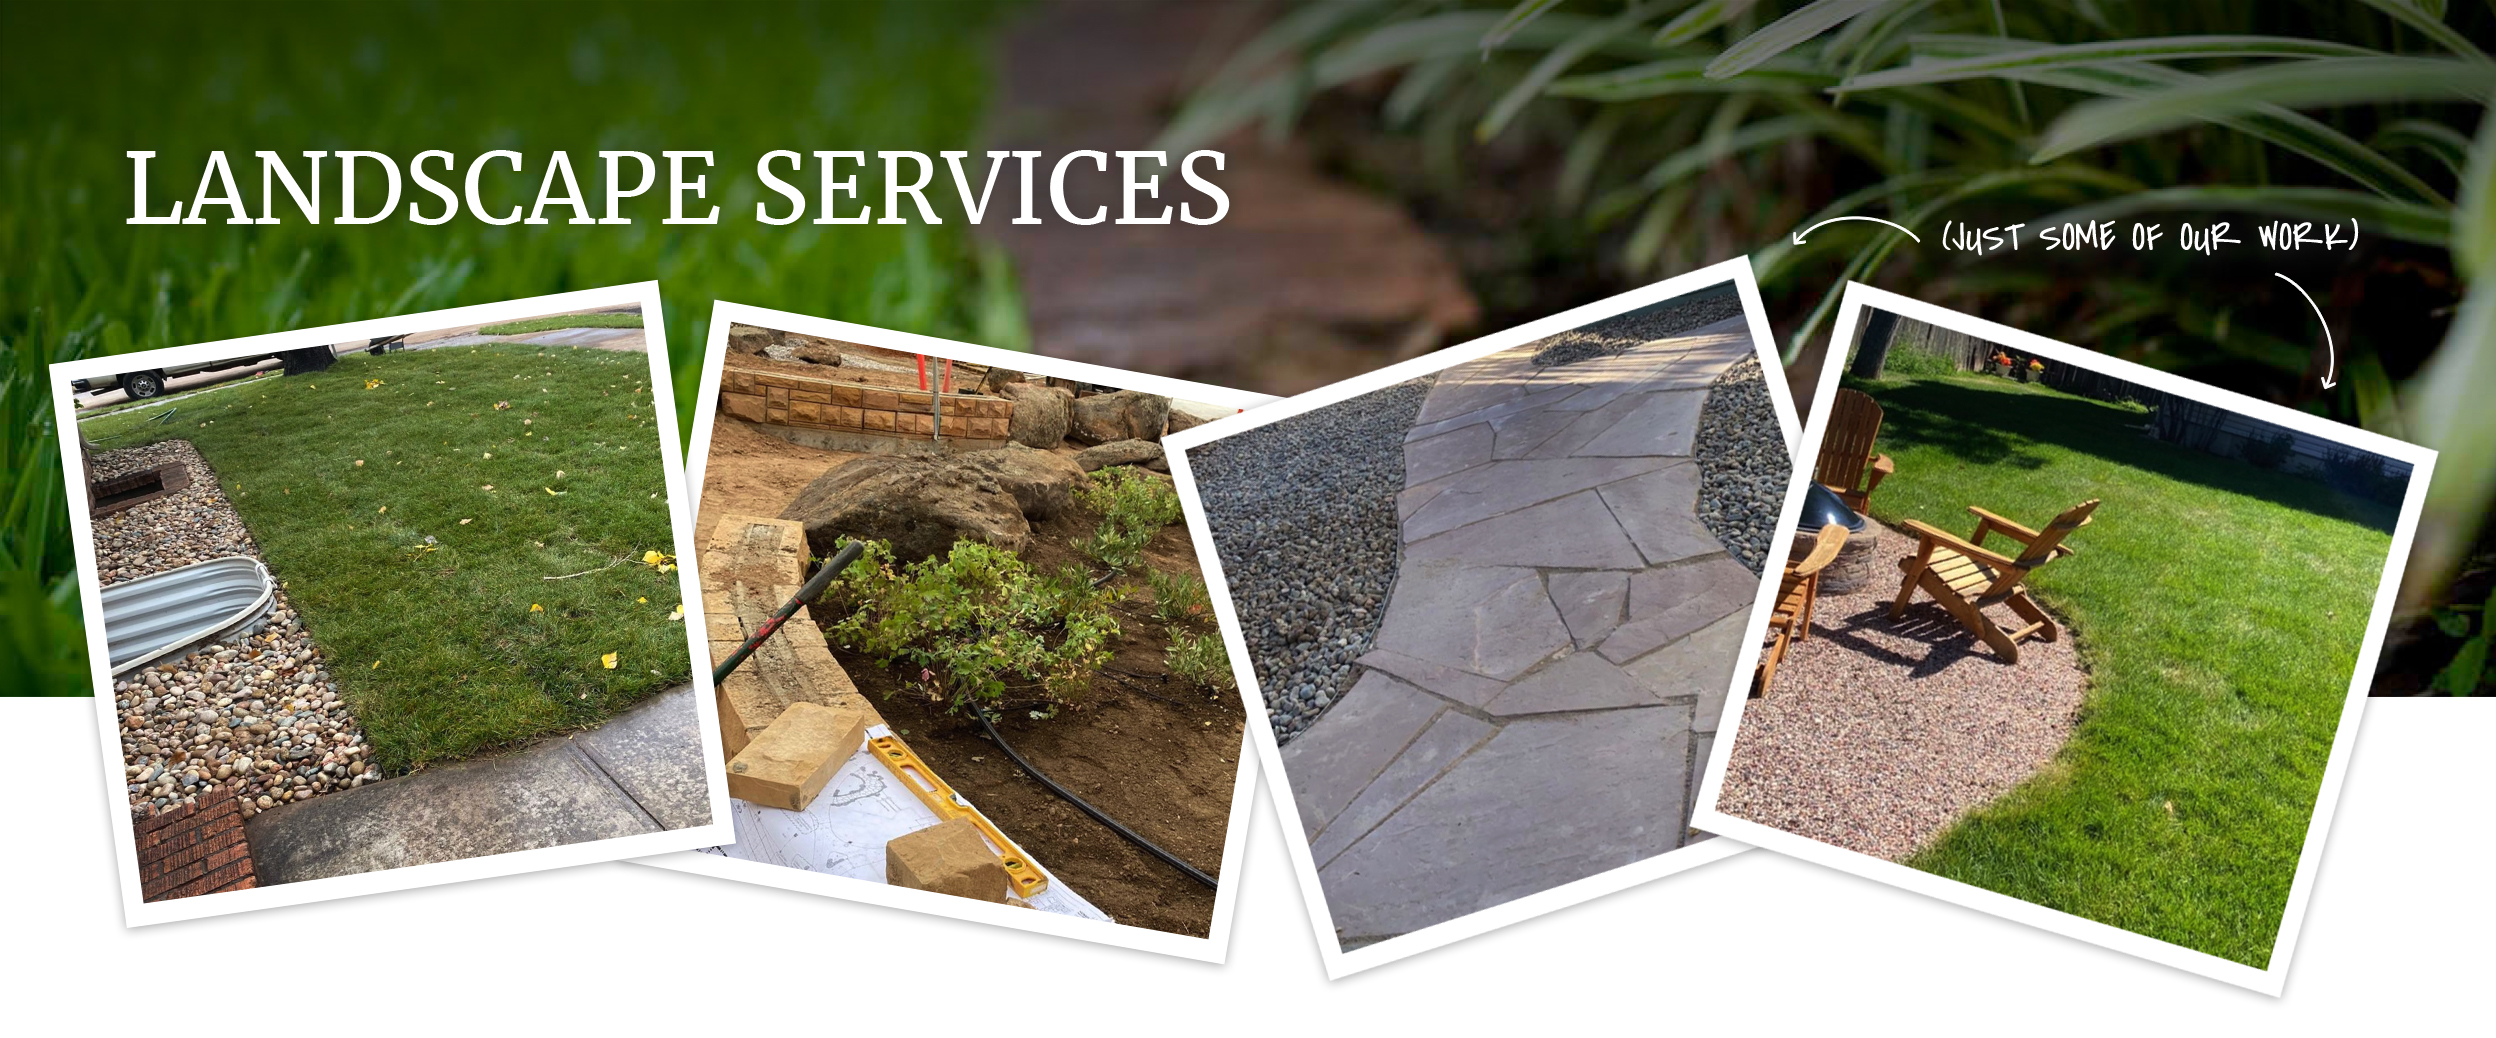 Landscaping Services with pictures of sod/grass, native plants, xeriscapes, rock paths, and more